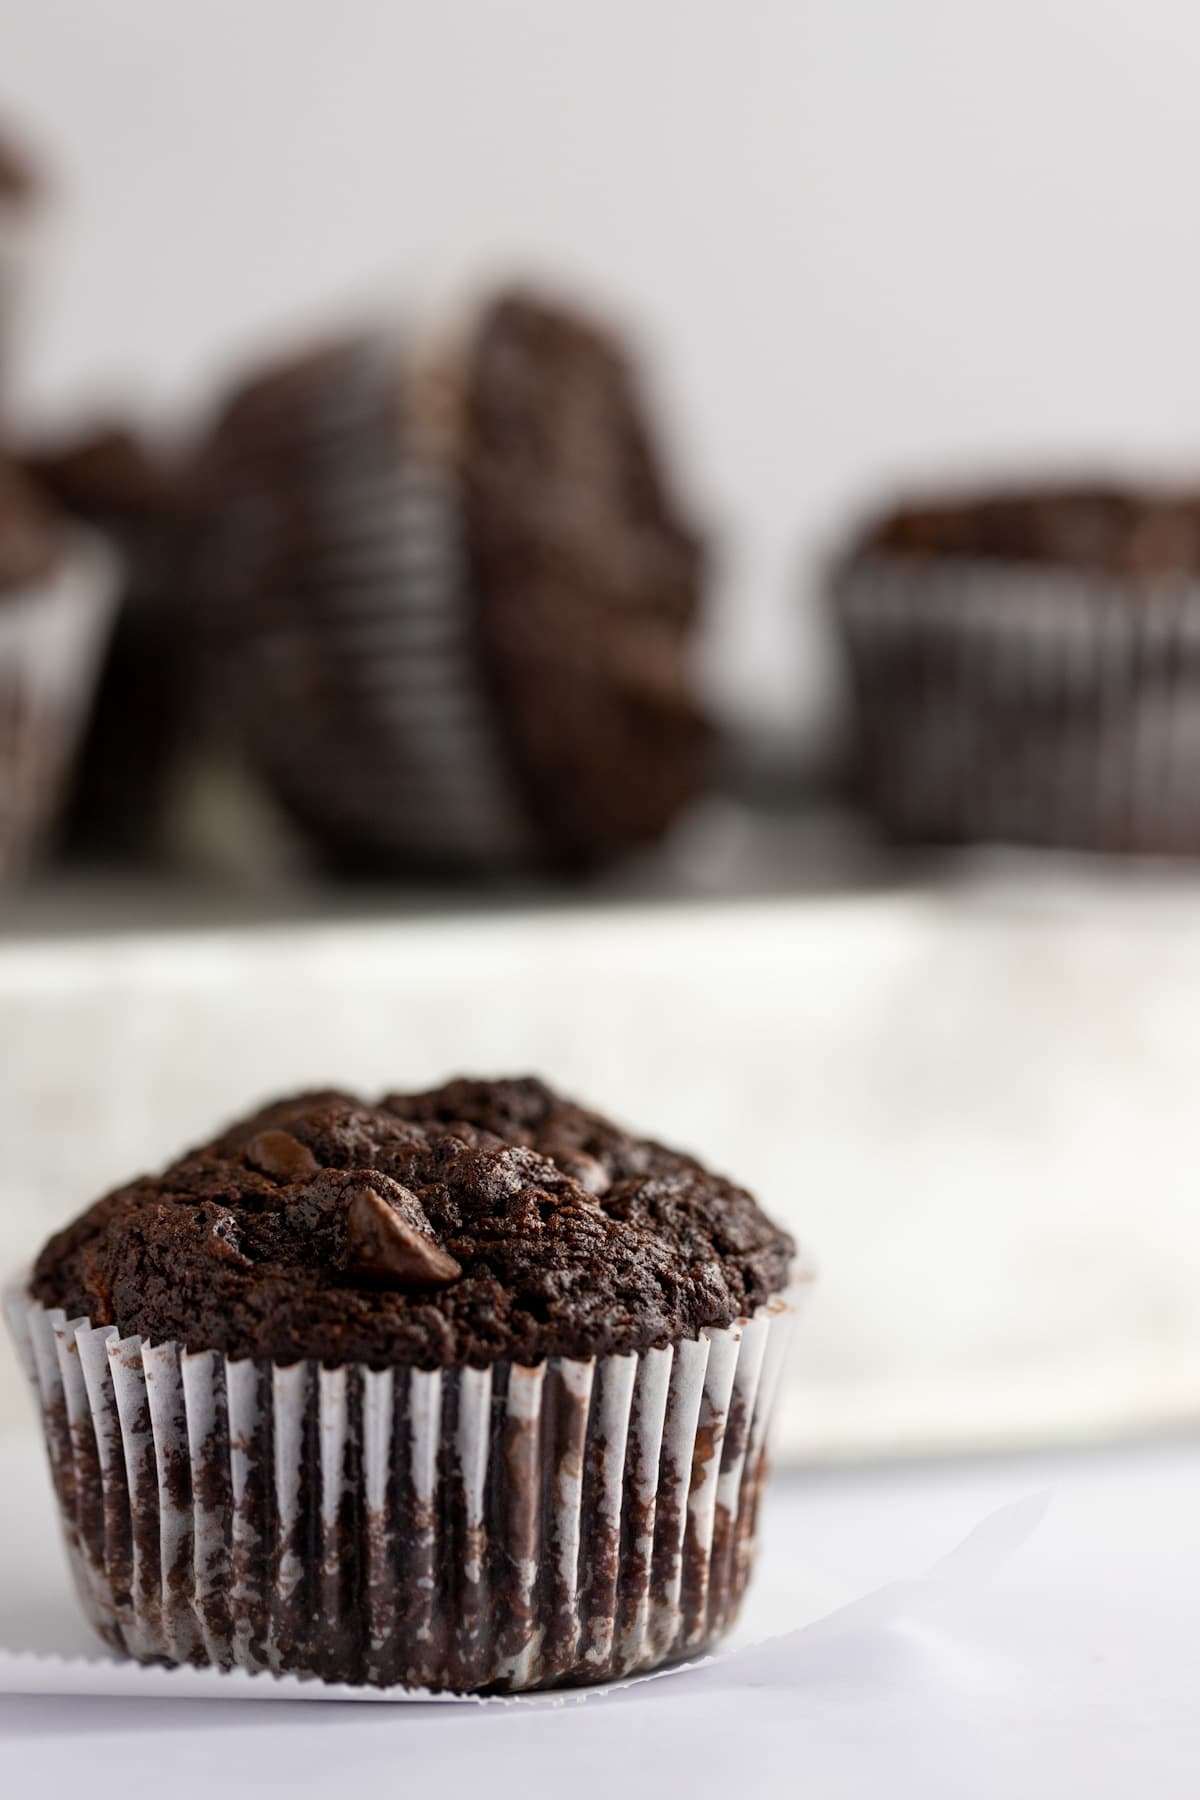 Close up of a sweet potato chocolate chip muffin with its wrapper on, and a tray of muffins out of focus in the background.